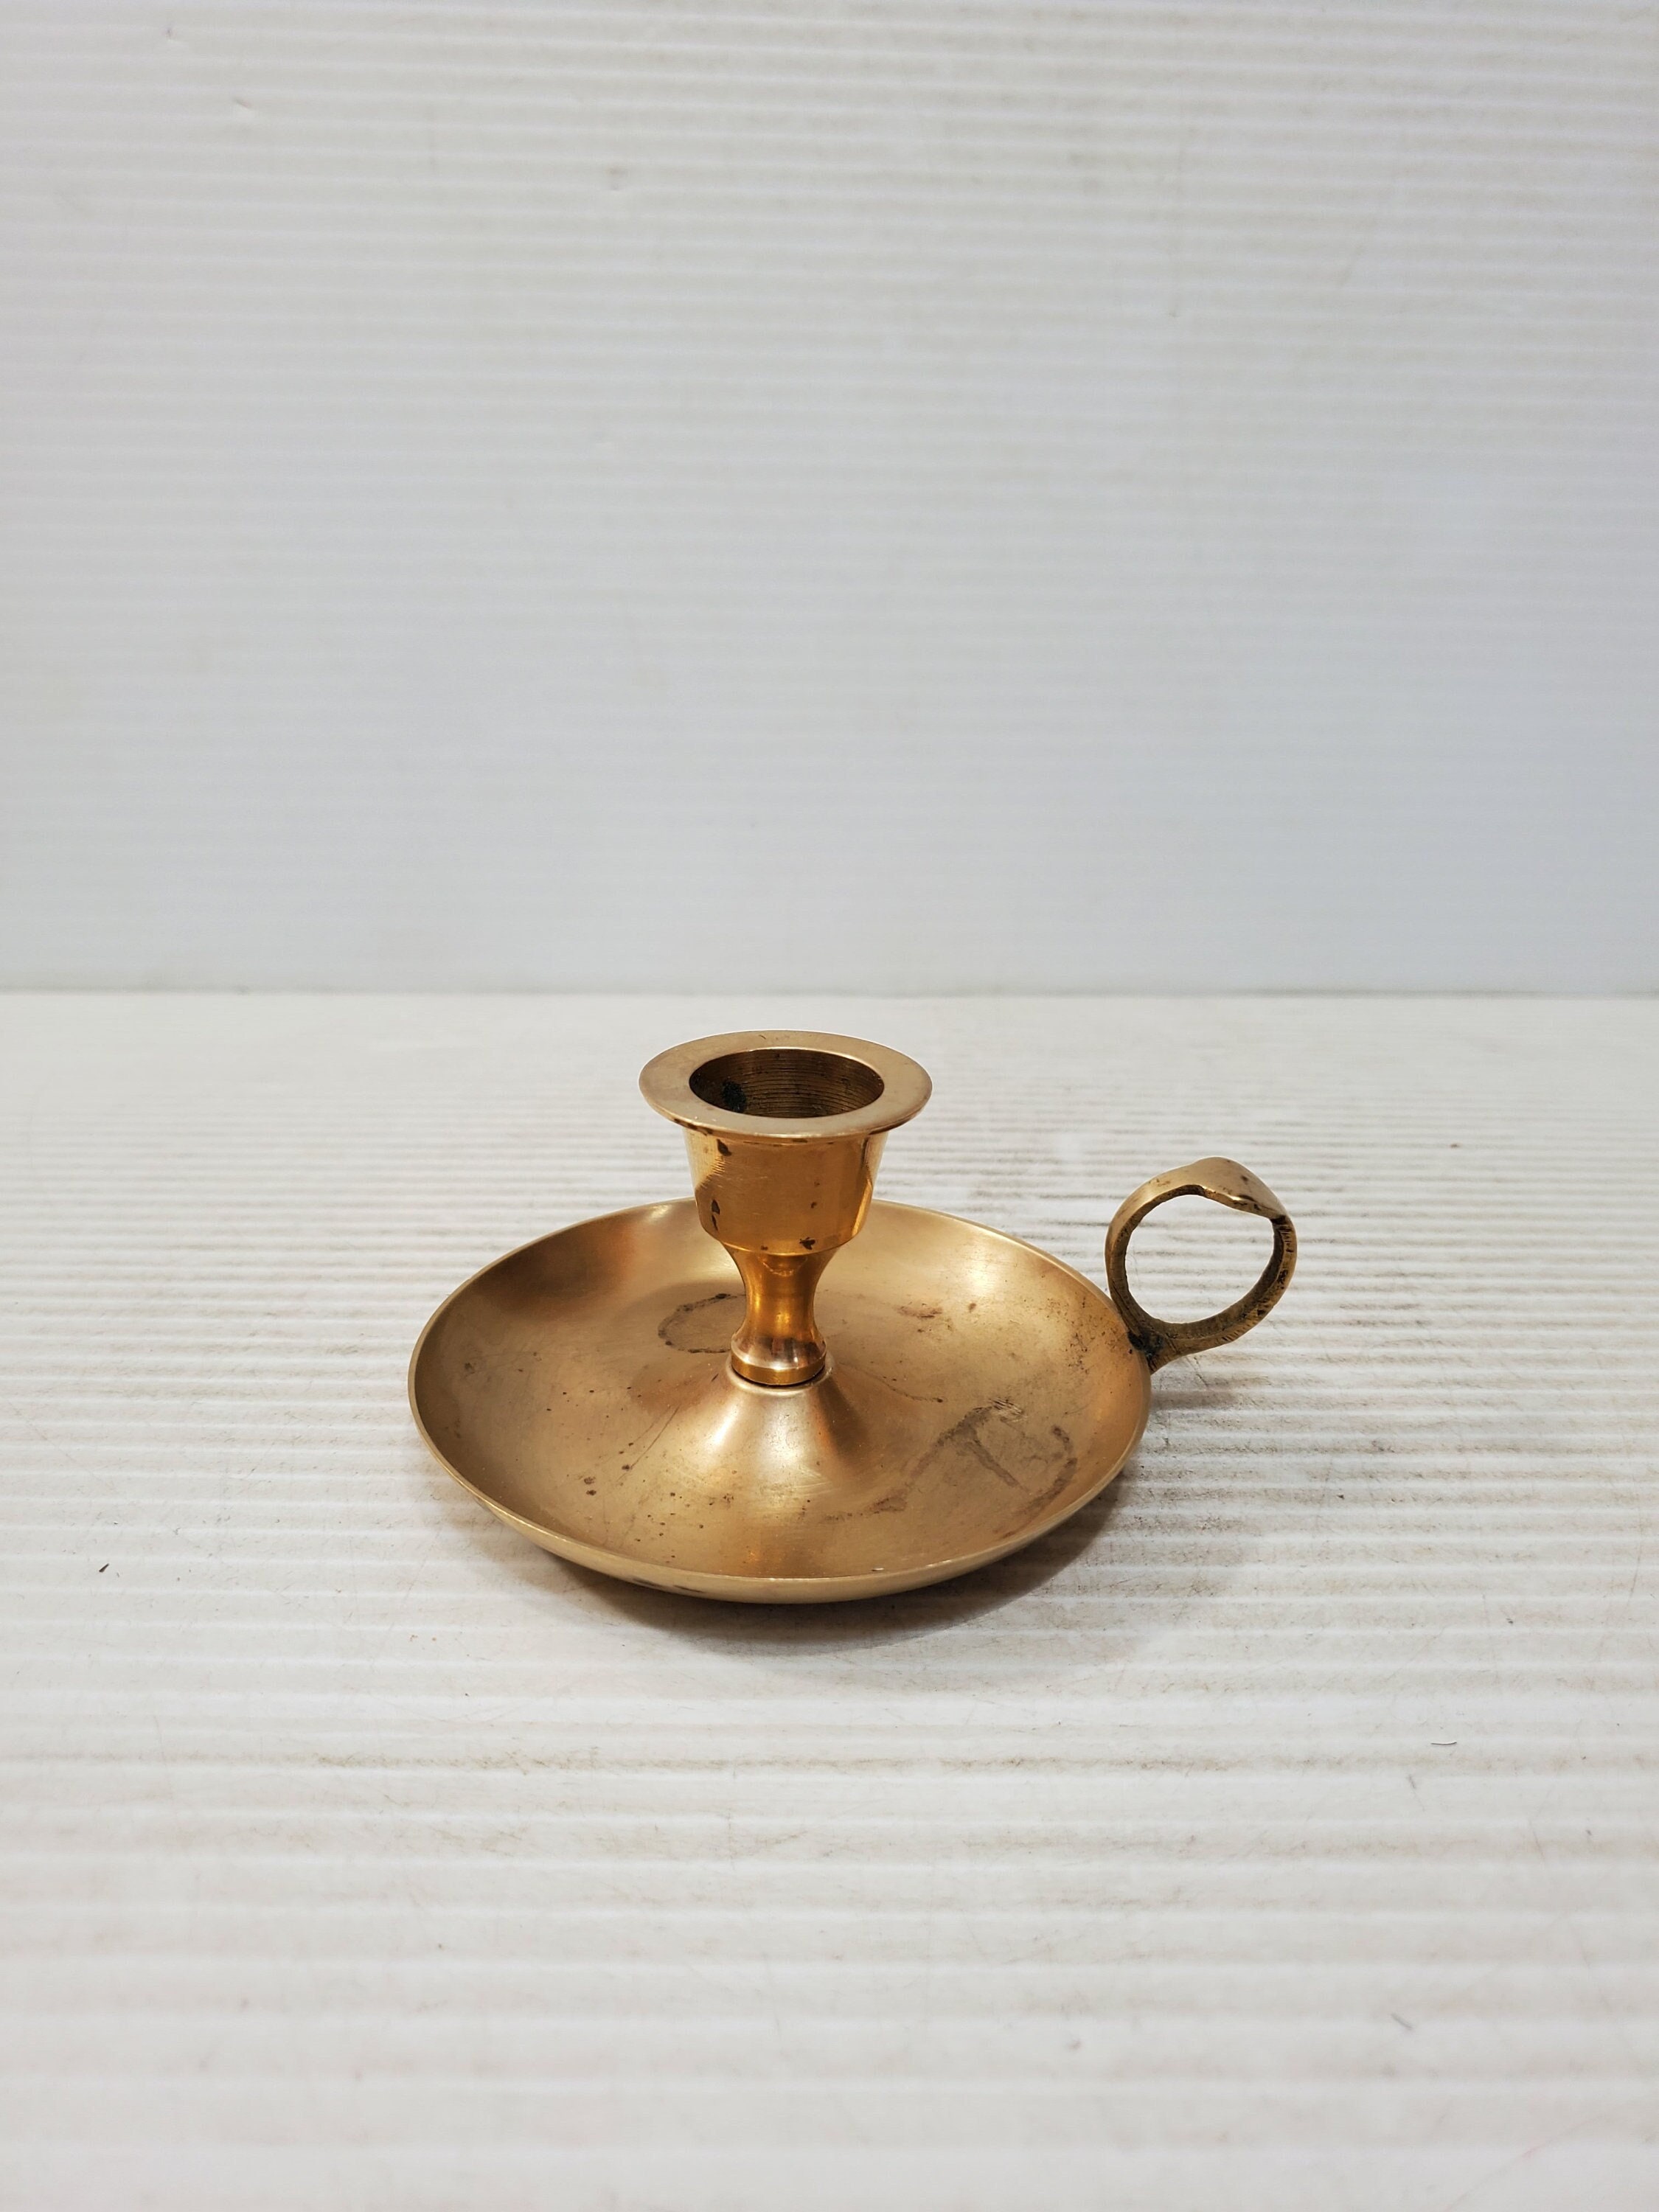 Charming Vintage Brass Chamber Stick Candle Holder With Finger Loop 